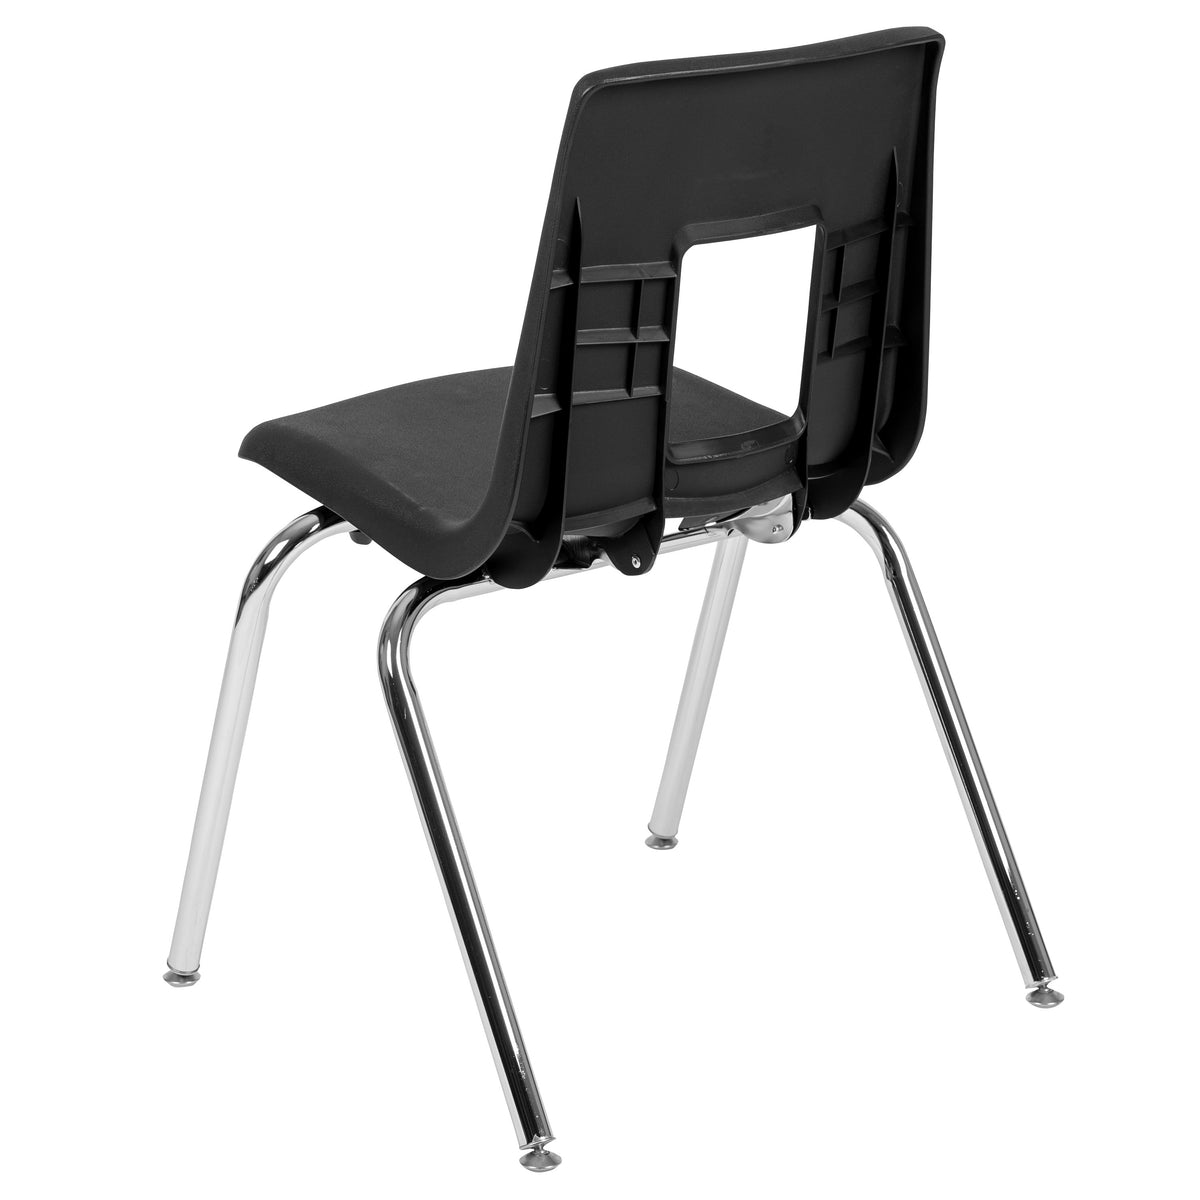 Black |#| Black Student Stack Chair 18inchH Seat - Classroom Chair for Middle-High-Adults